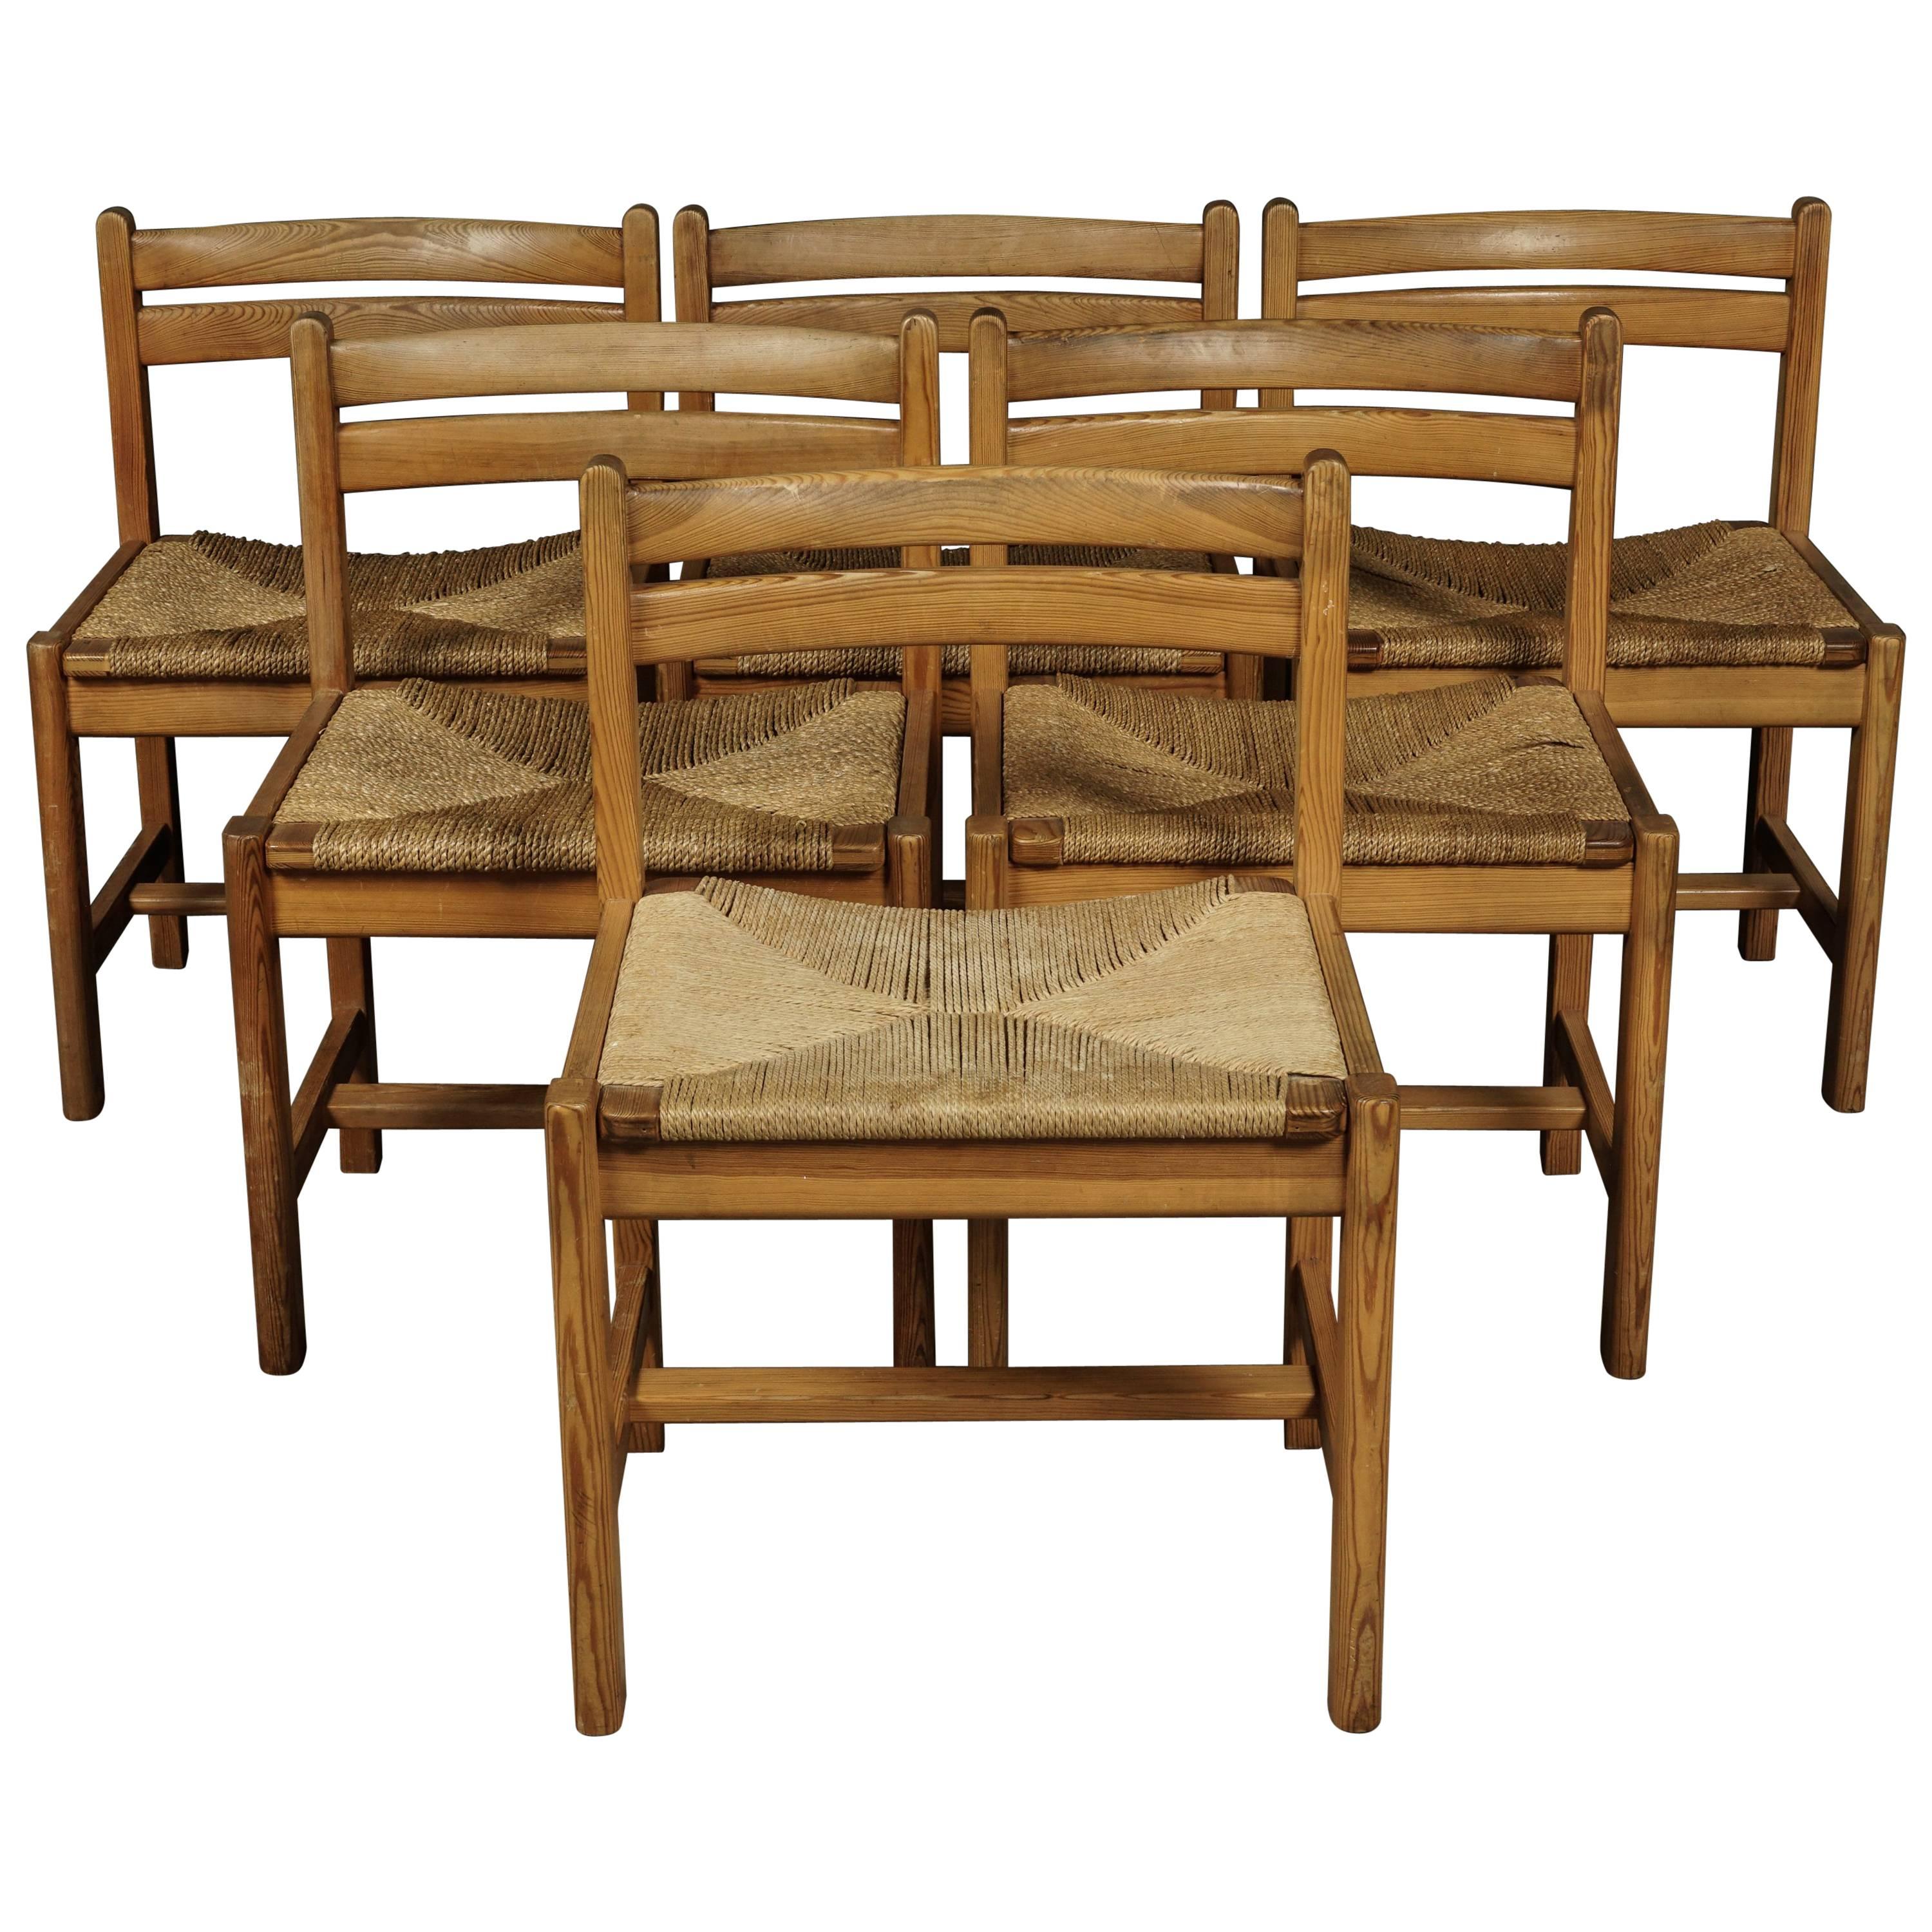 Set of Six Dining Chairs Designed by Børge Mogensen, Denmark, circa 1970